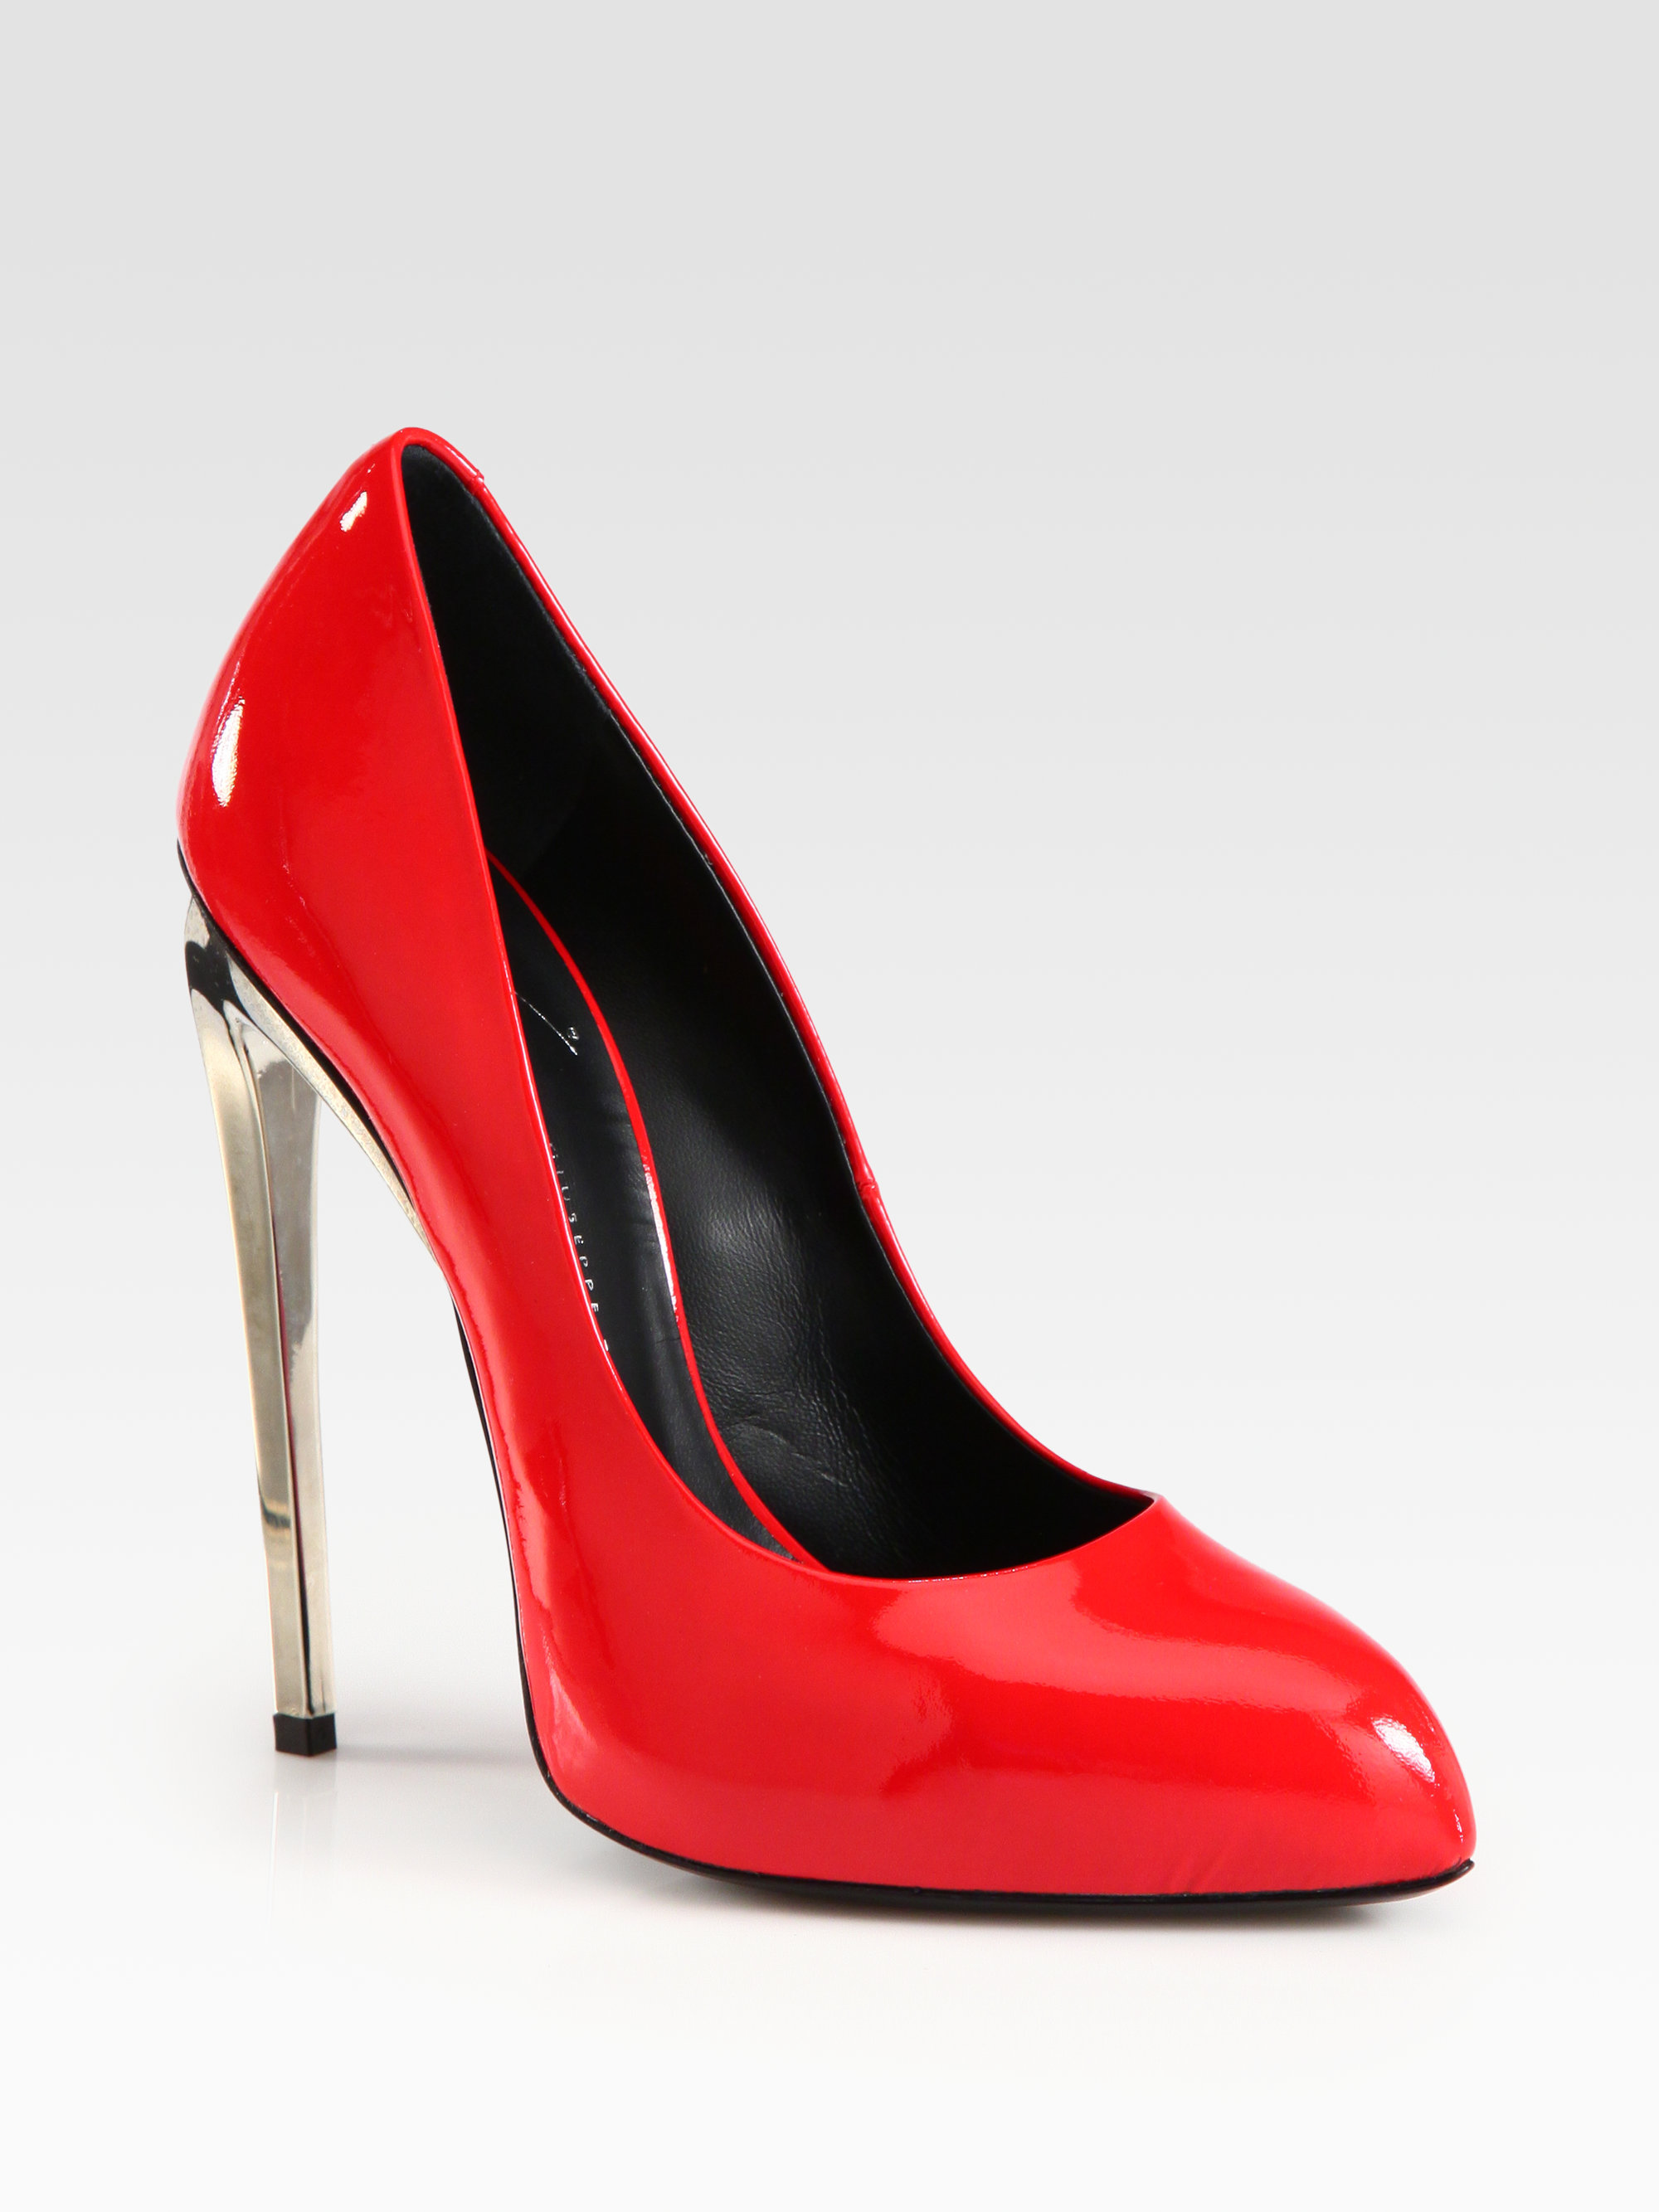 Giuseppe Zanotti Patent Leather and Metal Heel Pumps in Red | Lyst